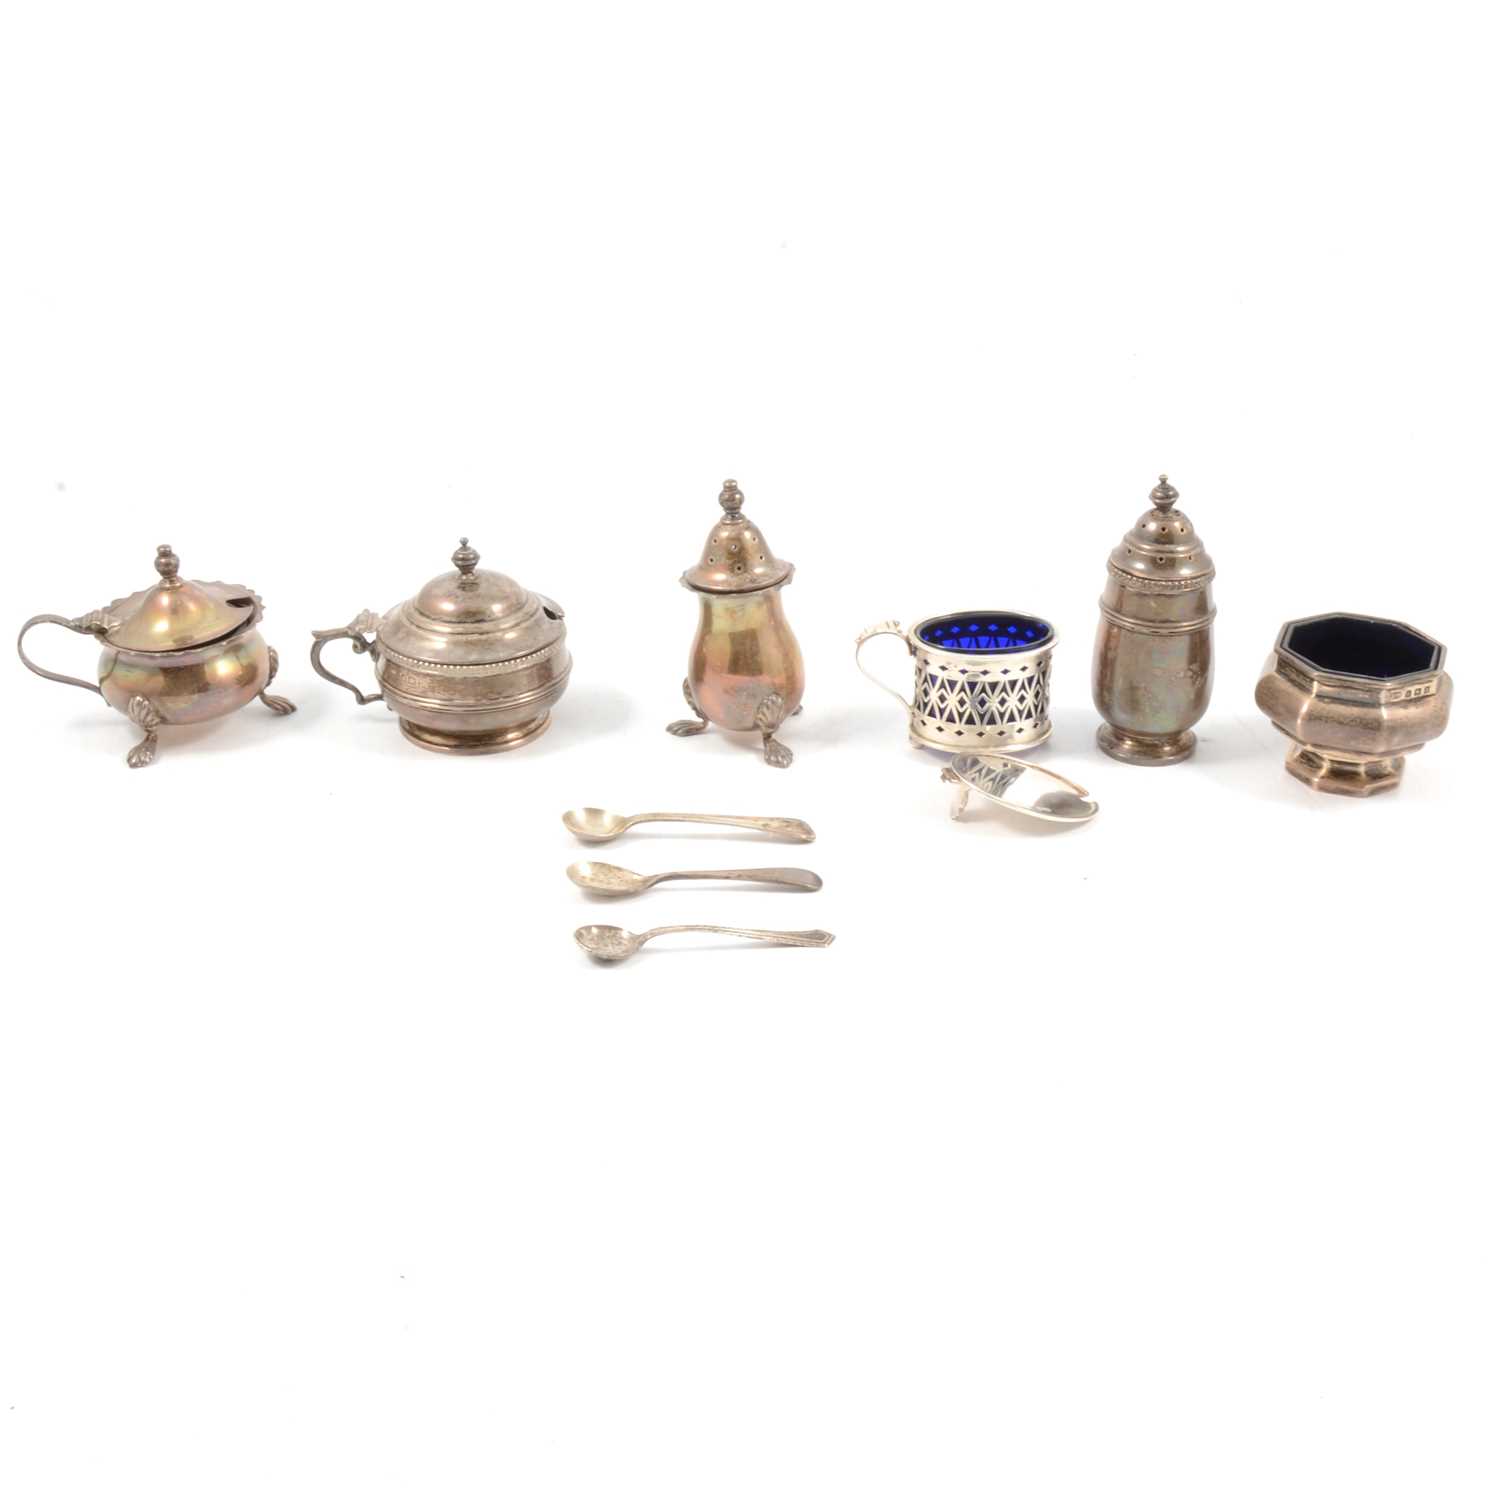 Lot 136 - Silver mustard pot and pepperette, Adie Brothers, Birmingham 1928, and other silver condiments.